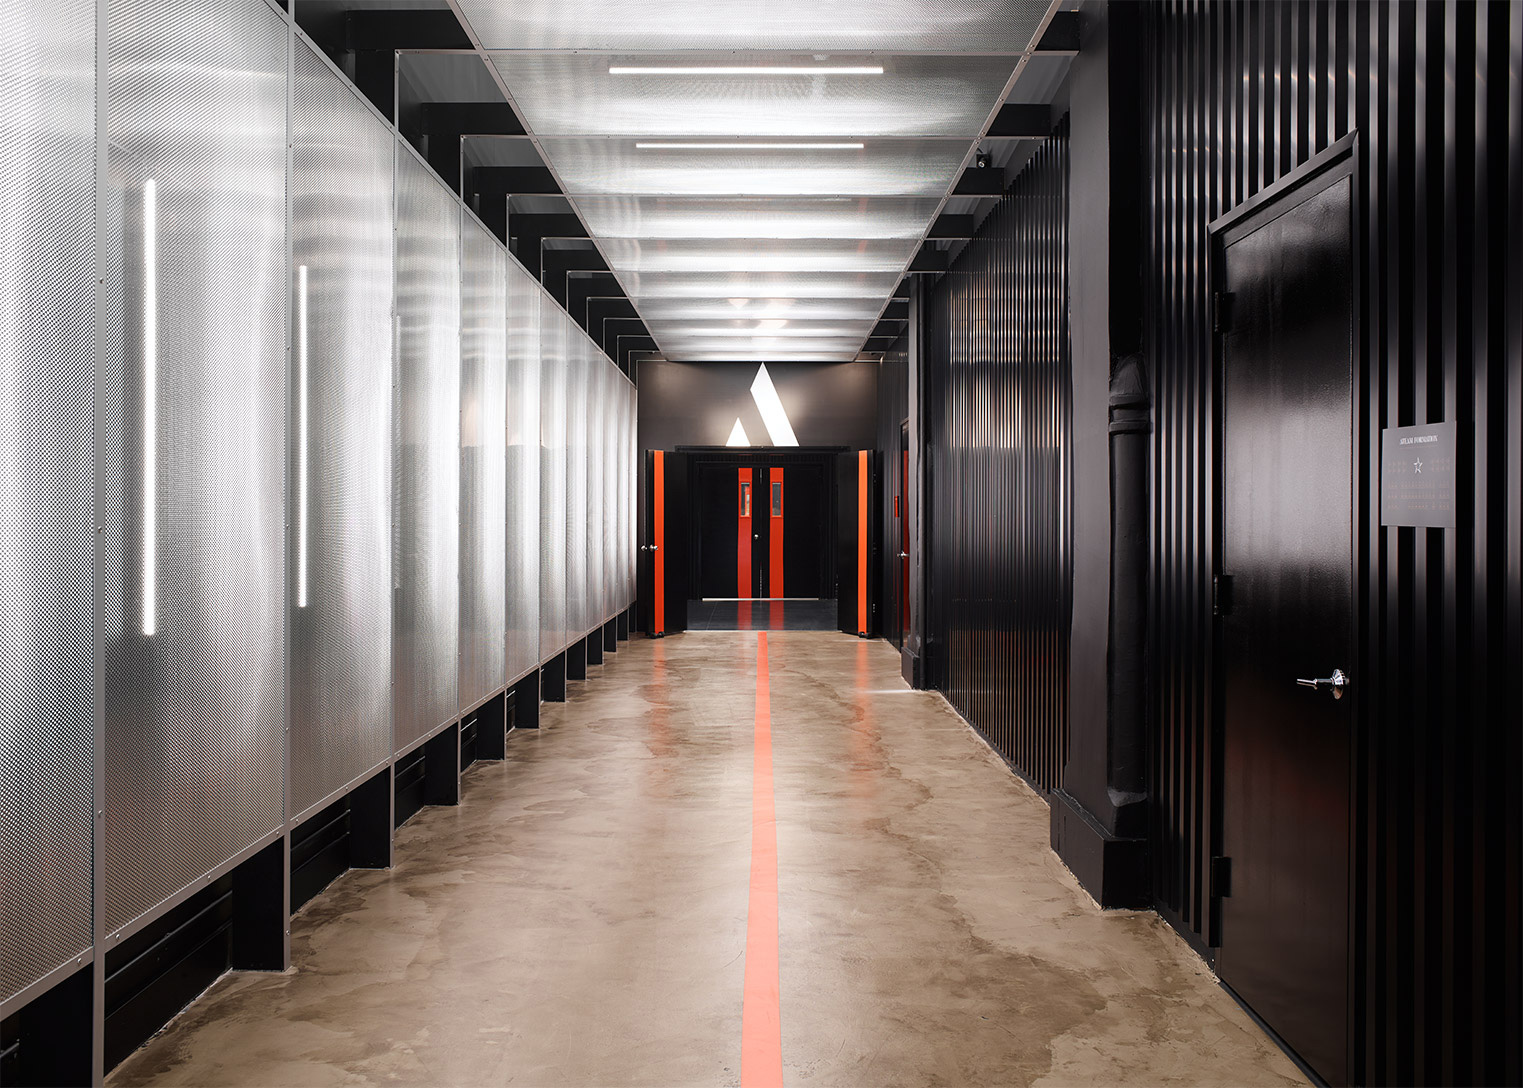 Lighting designer Christian Munoz lined the entry corridor to the AARMY fitness center with linear ceiling and wall lights to create the atmosphere of entering an arena for battle.